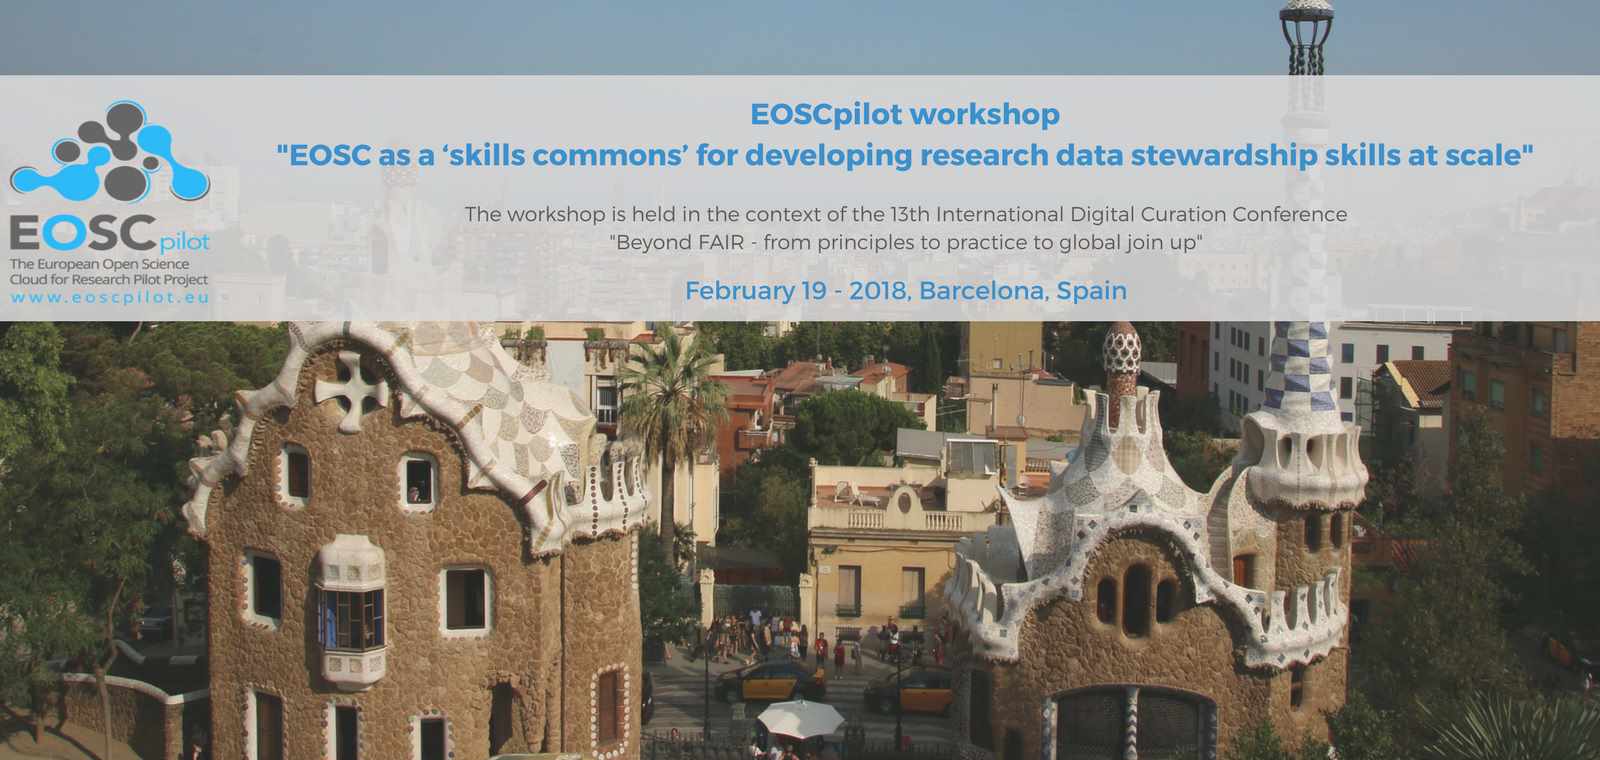 EOSC as a ‘skills commons’ for developing research data stewardship skills at scale